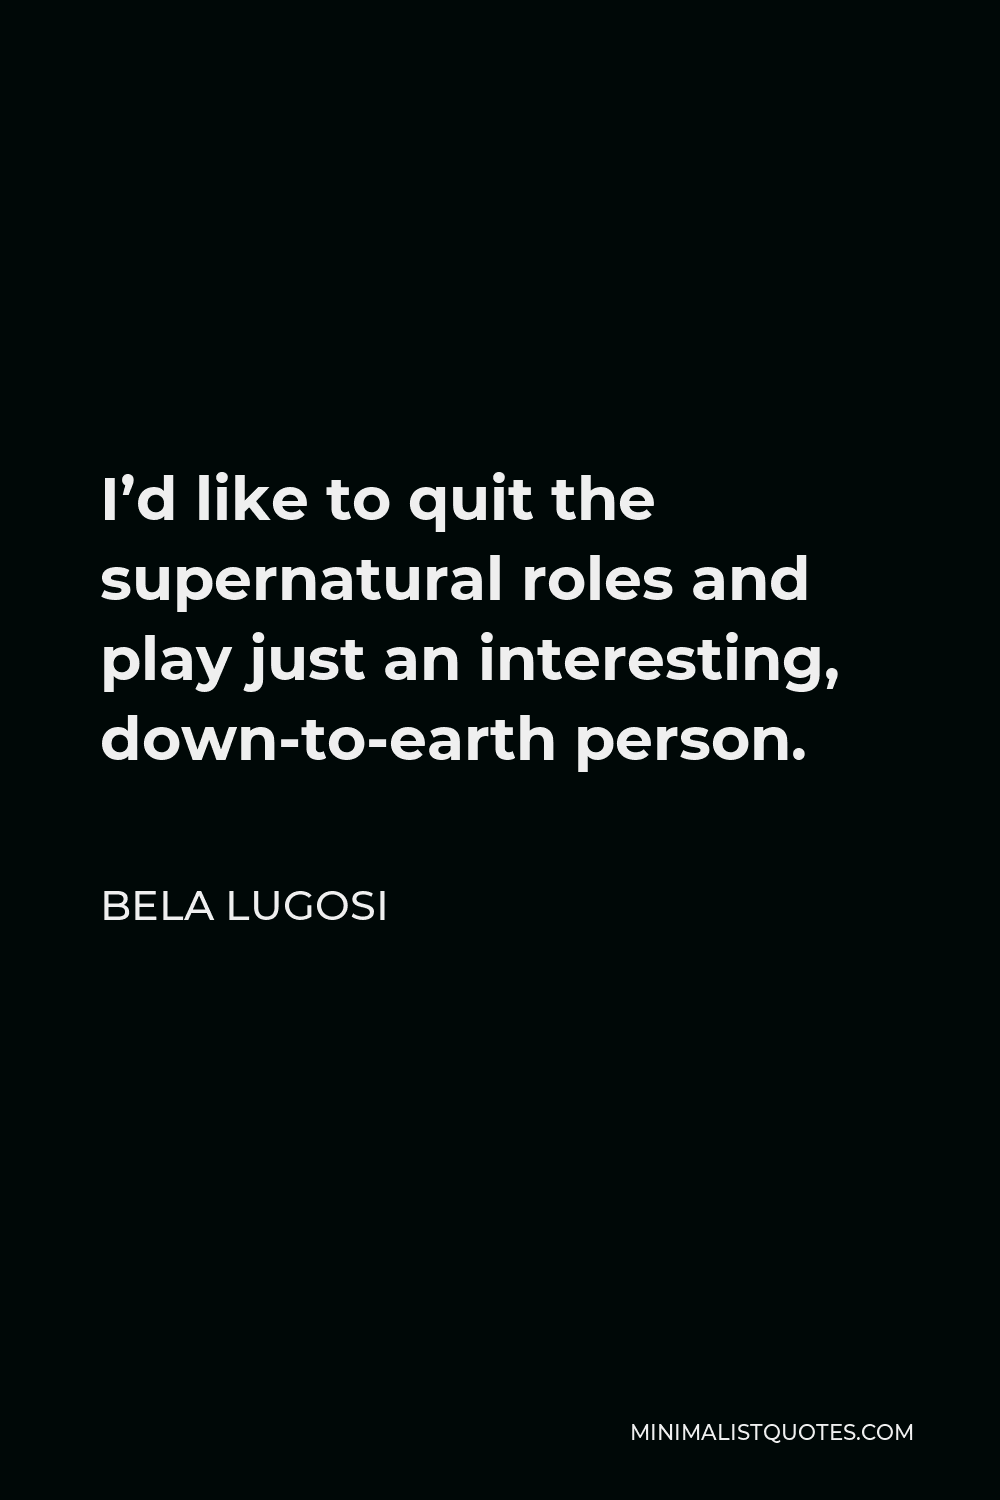 Bela Lugosi Quote - I’d like to quit the supernatural roles and play just an interesting, down-to-earth person.